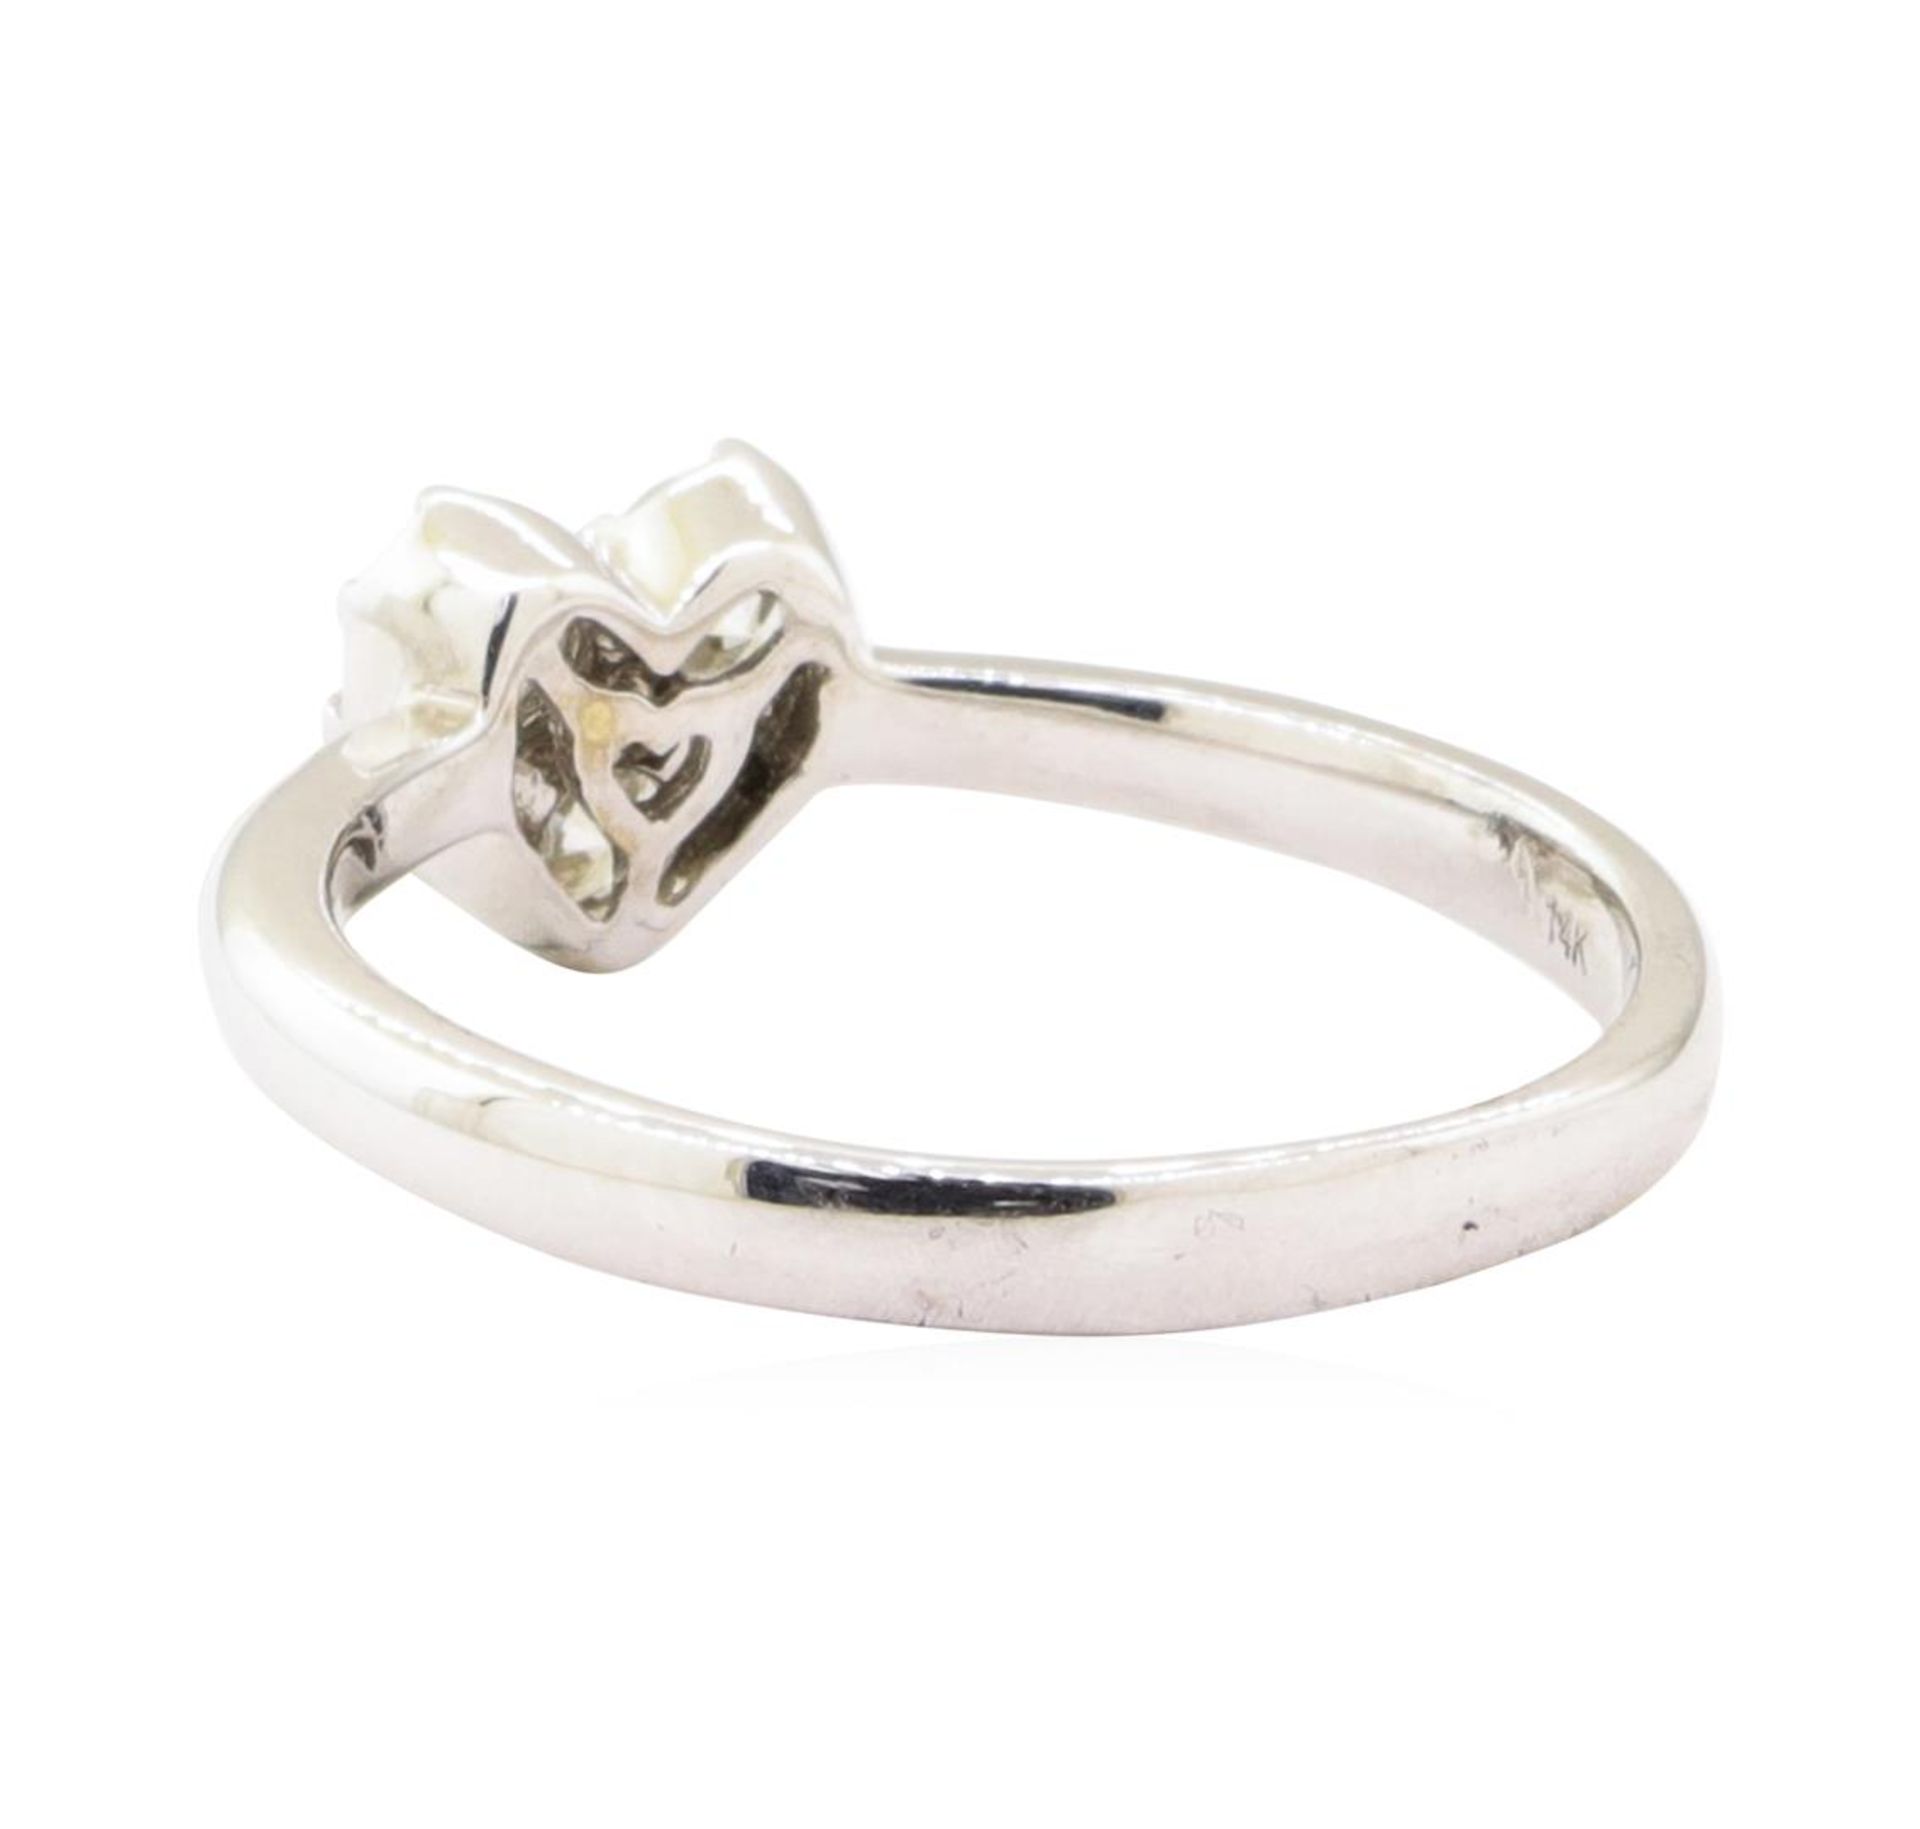 0.41ctw Diamond Heart Shaped Ring - 14KT White Gold - Image 3 of 4